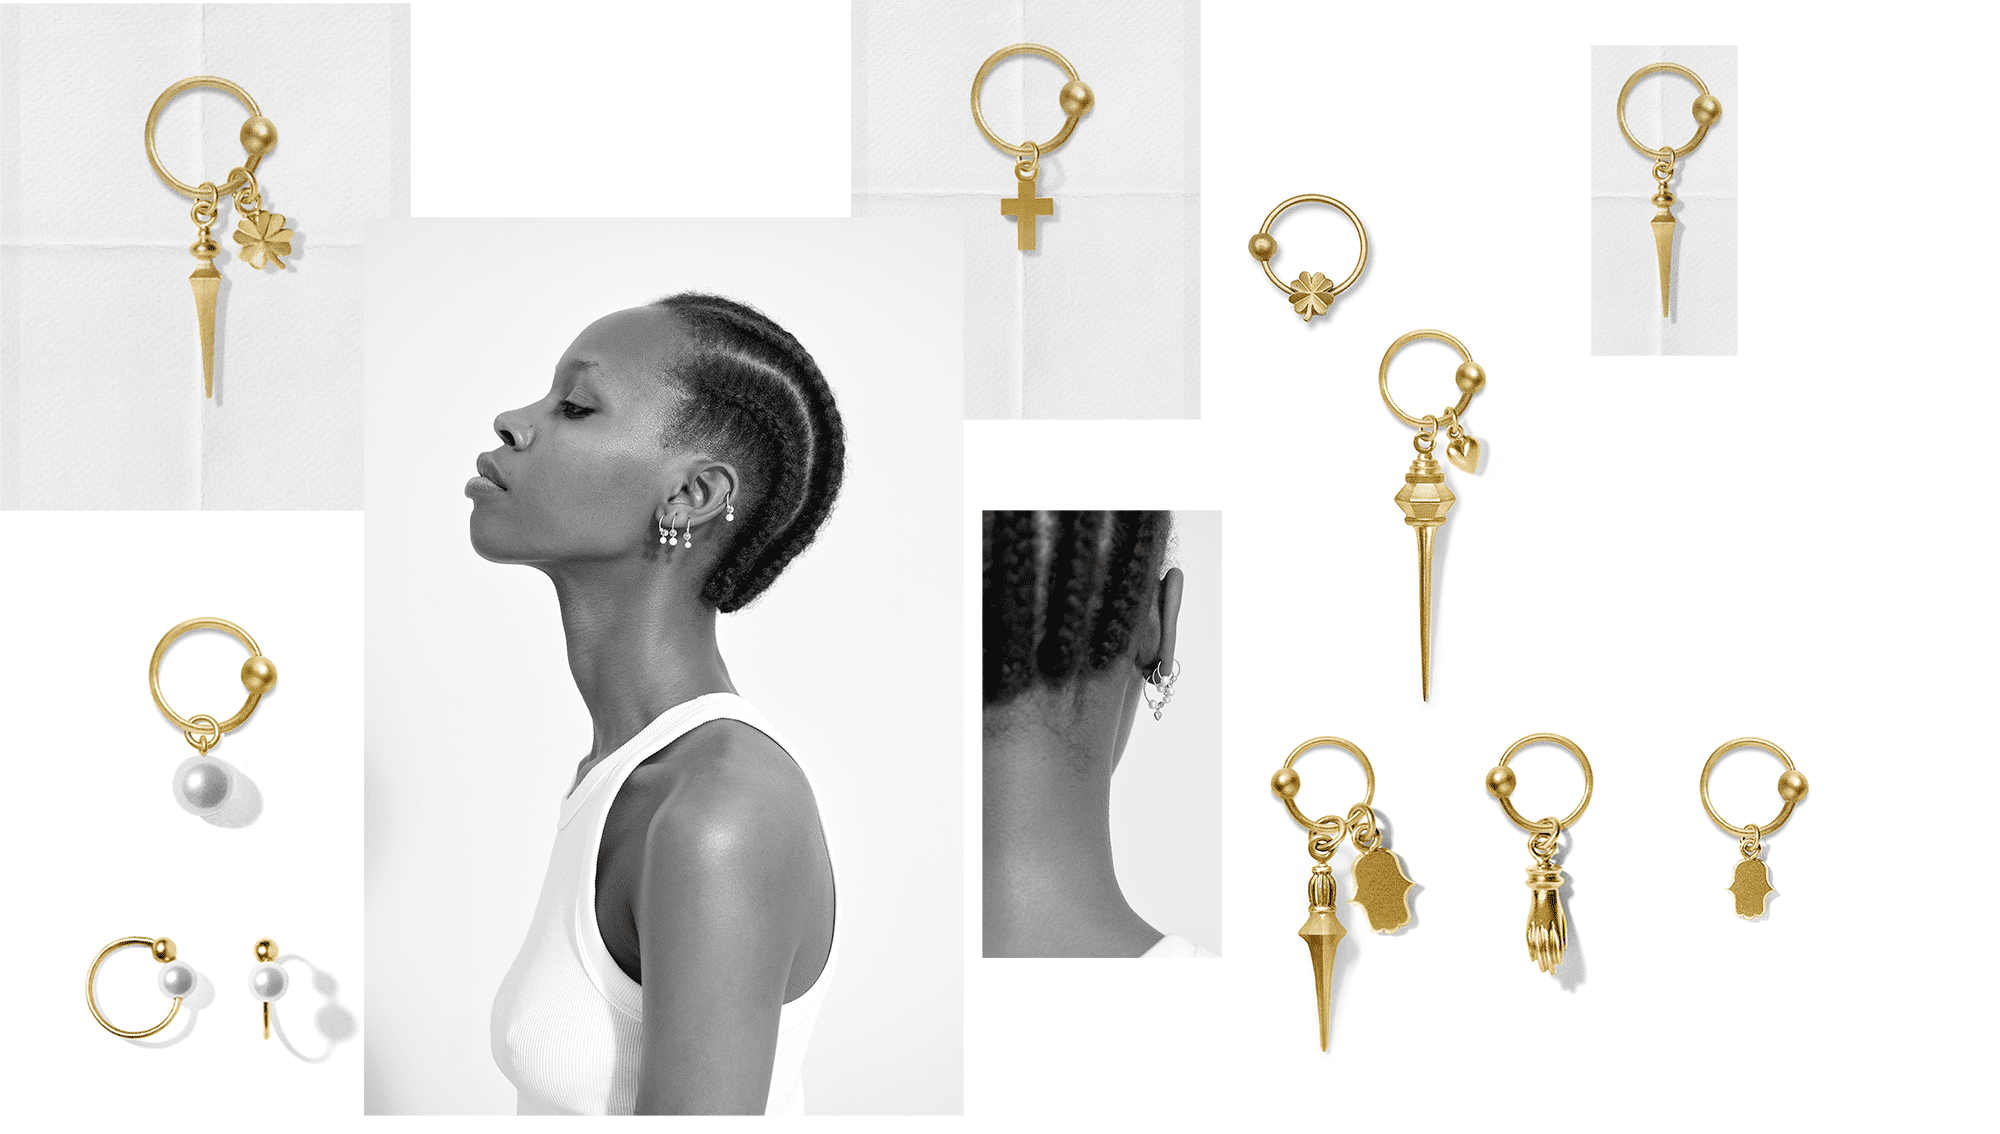 Mood board with different earrings from the fragment collection